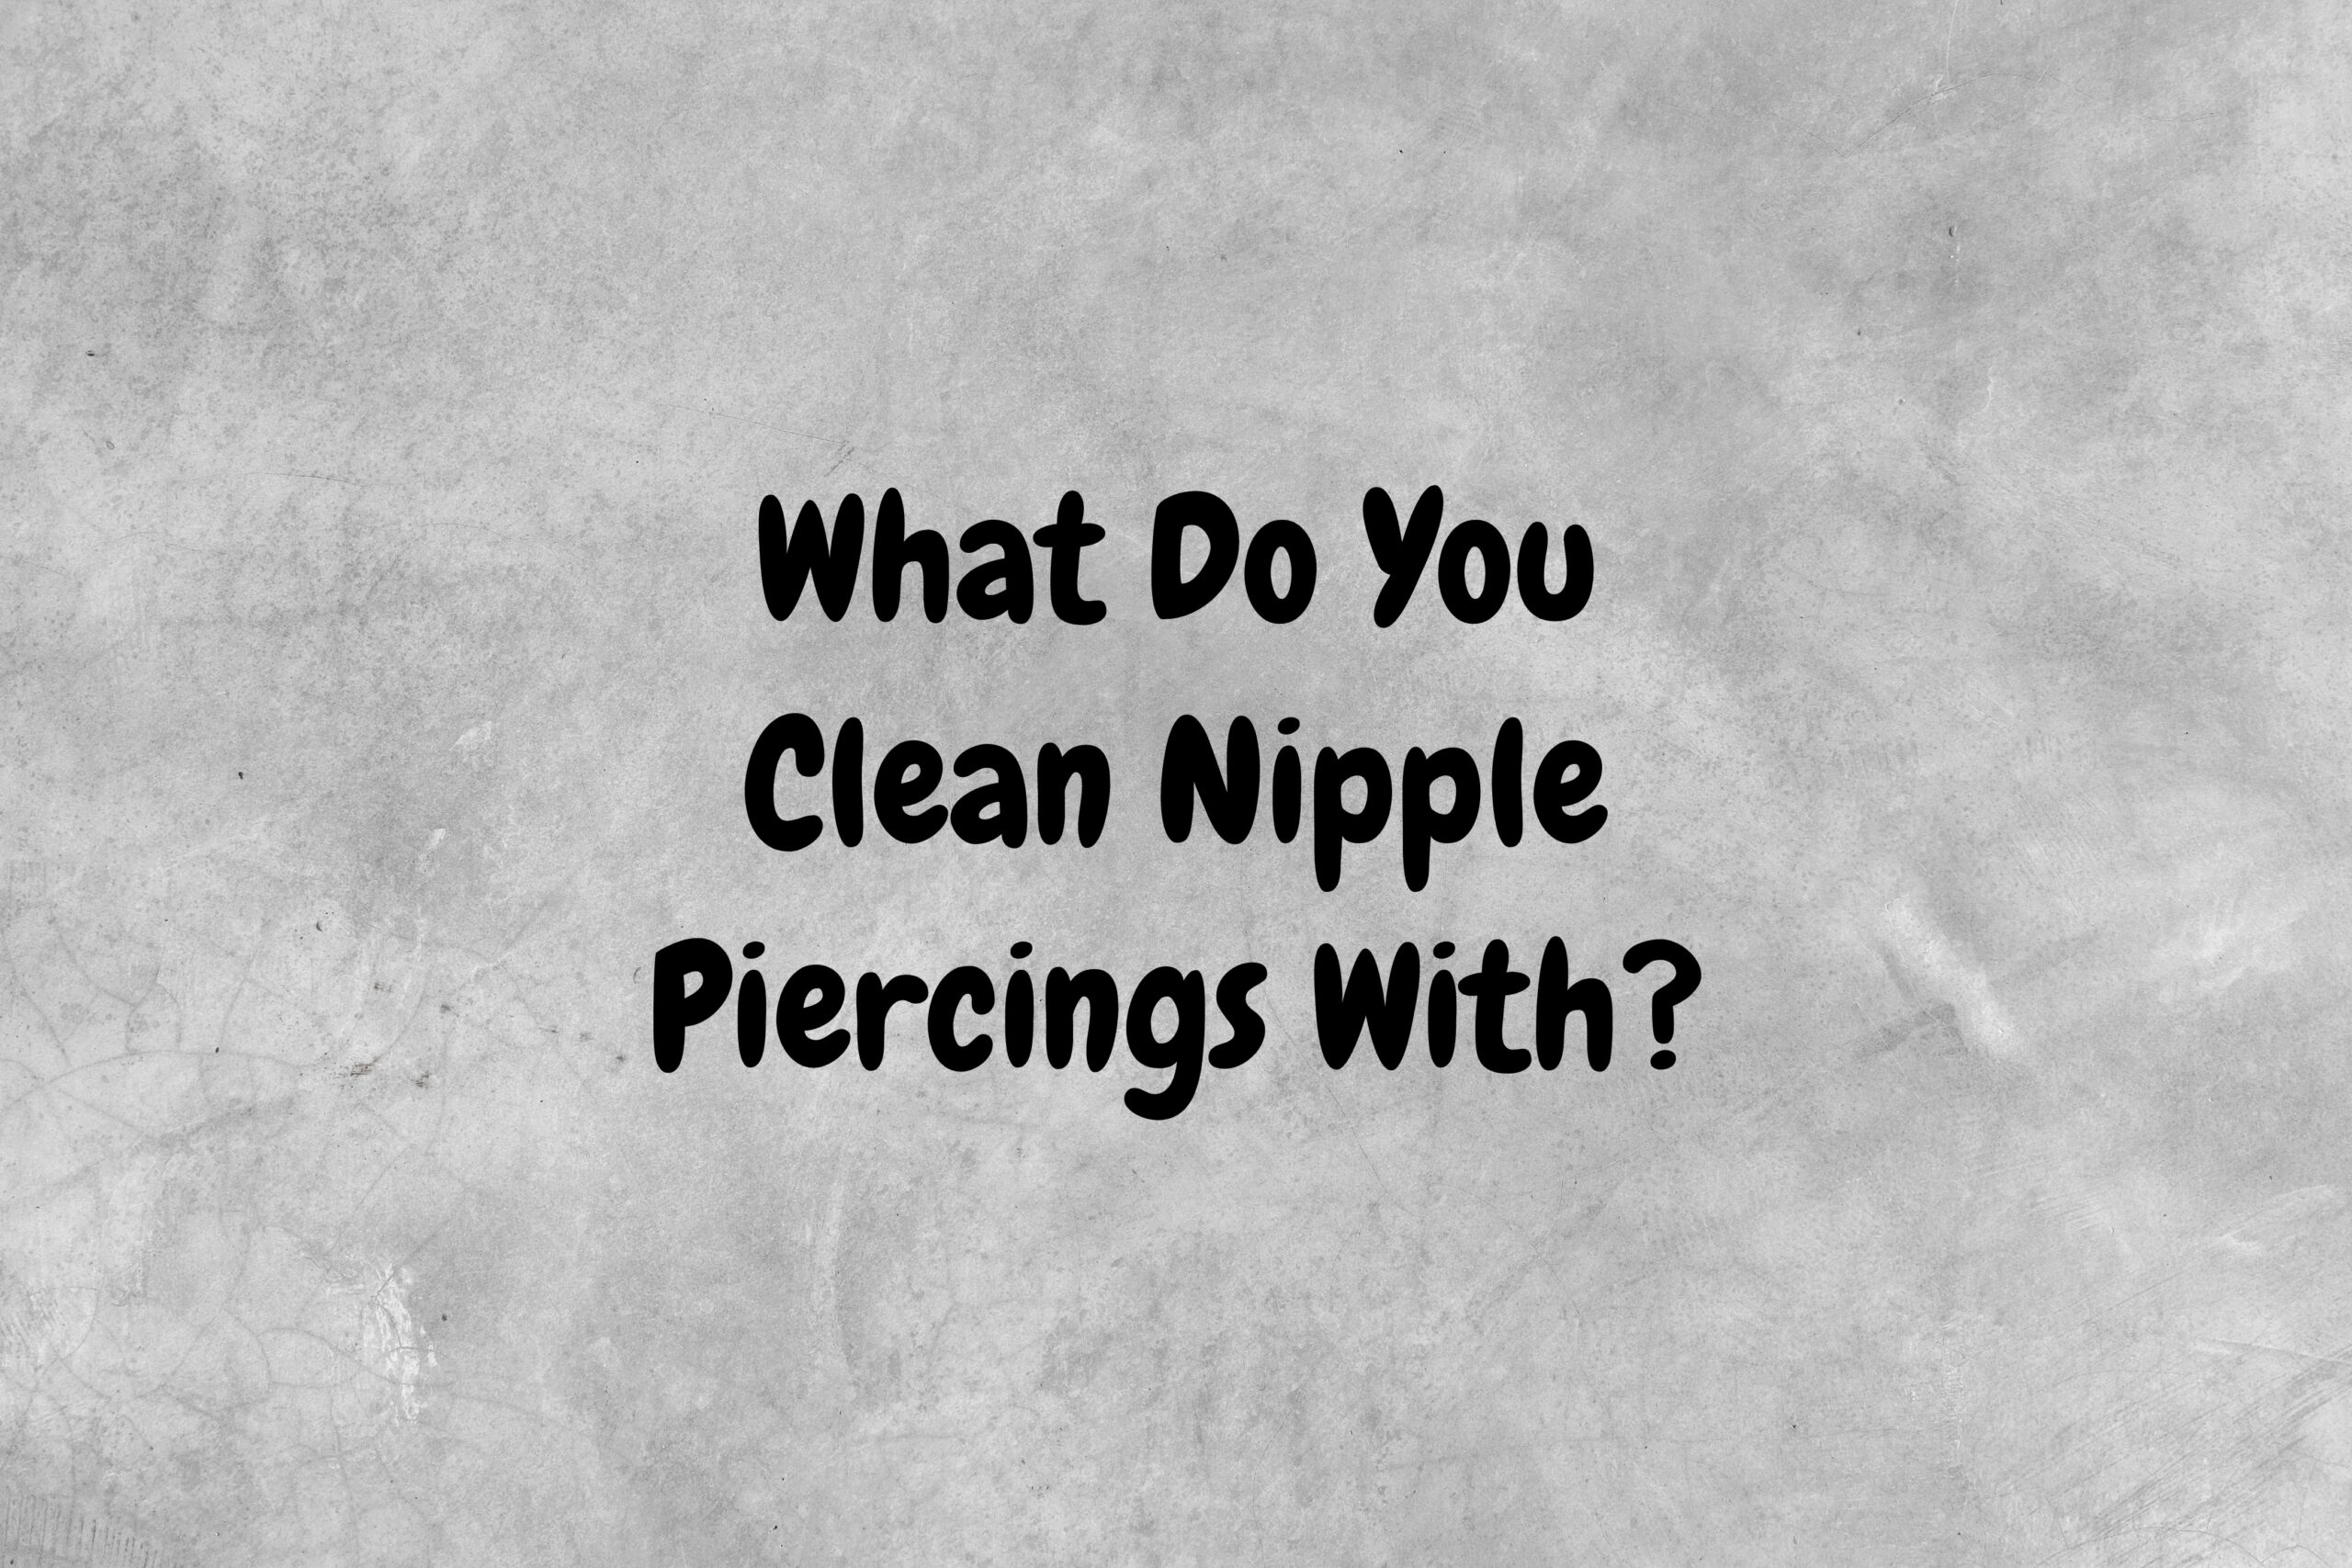 What Do You Clean Nipple Piercings With?